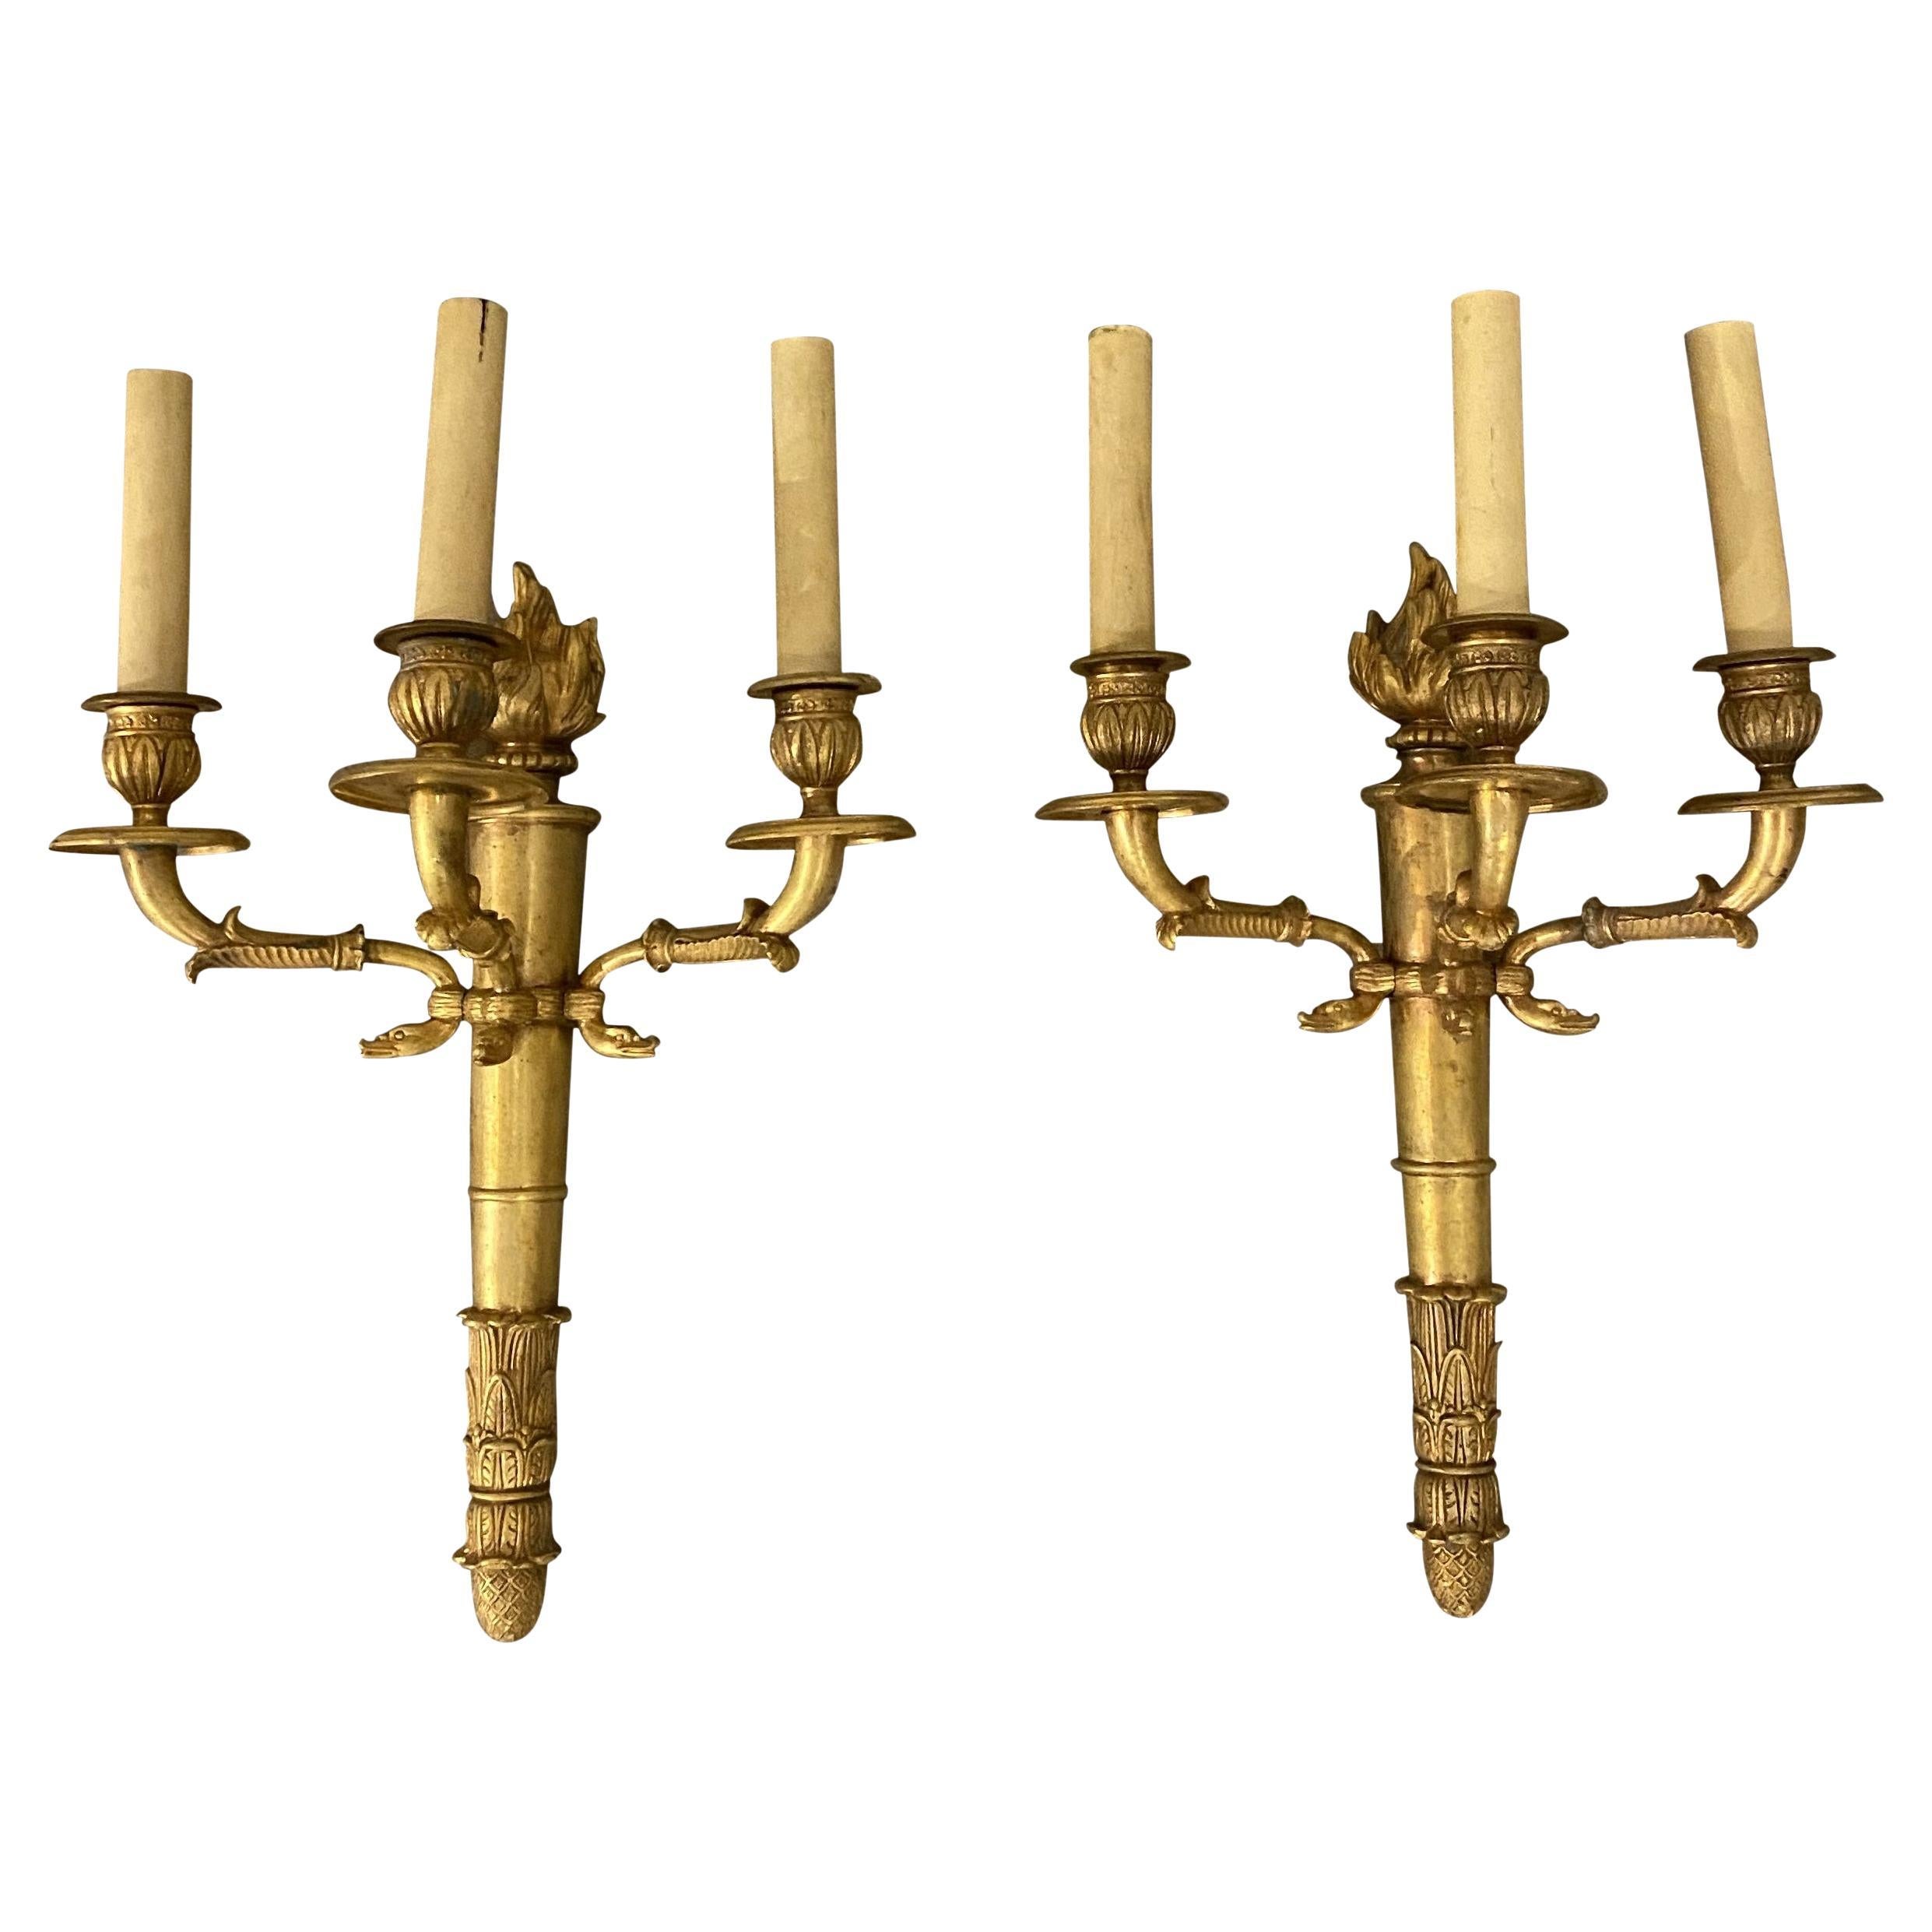 1930s French Empire Three lights Sconces